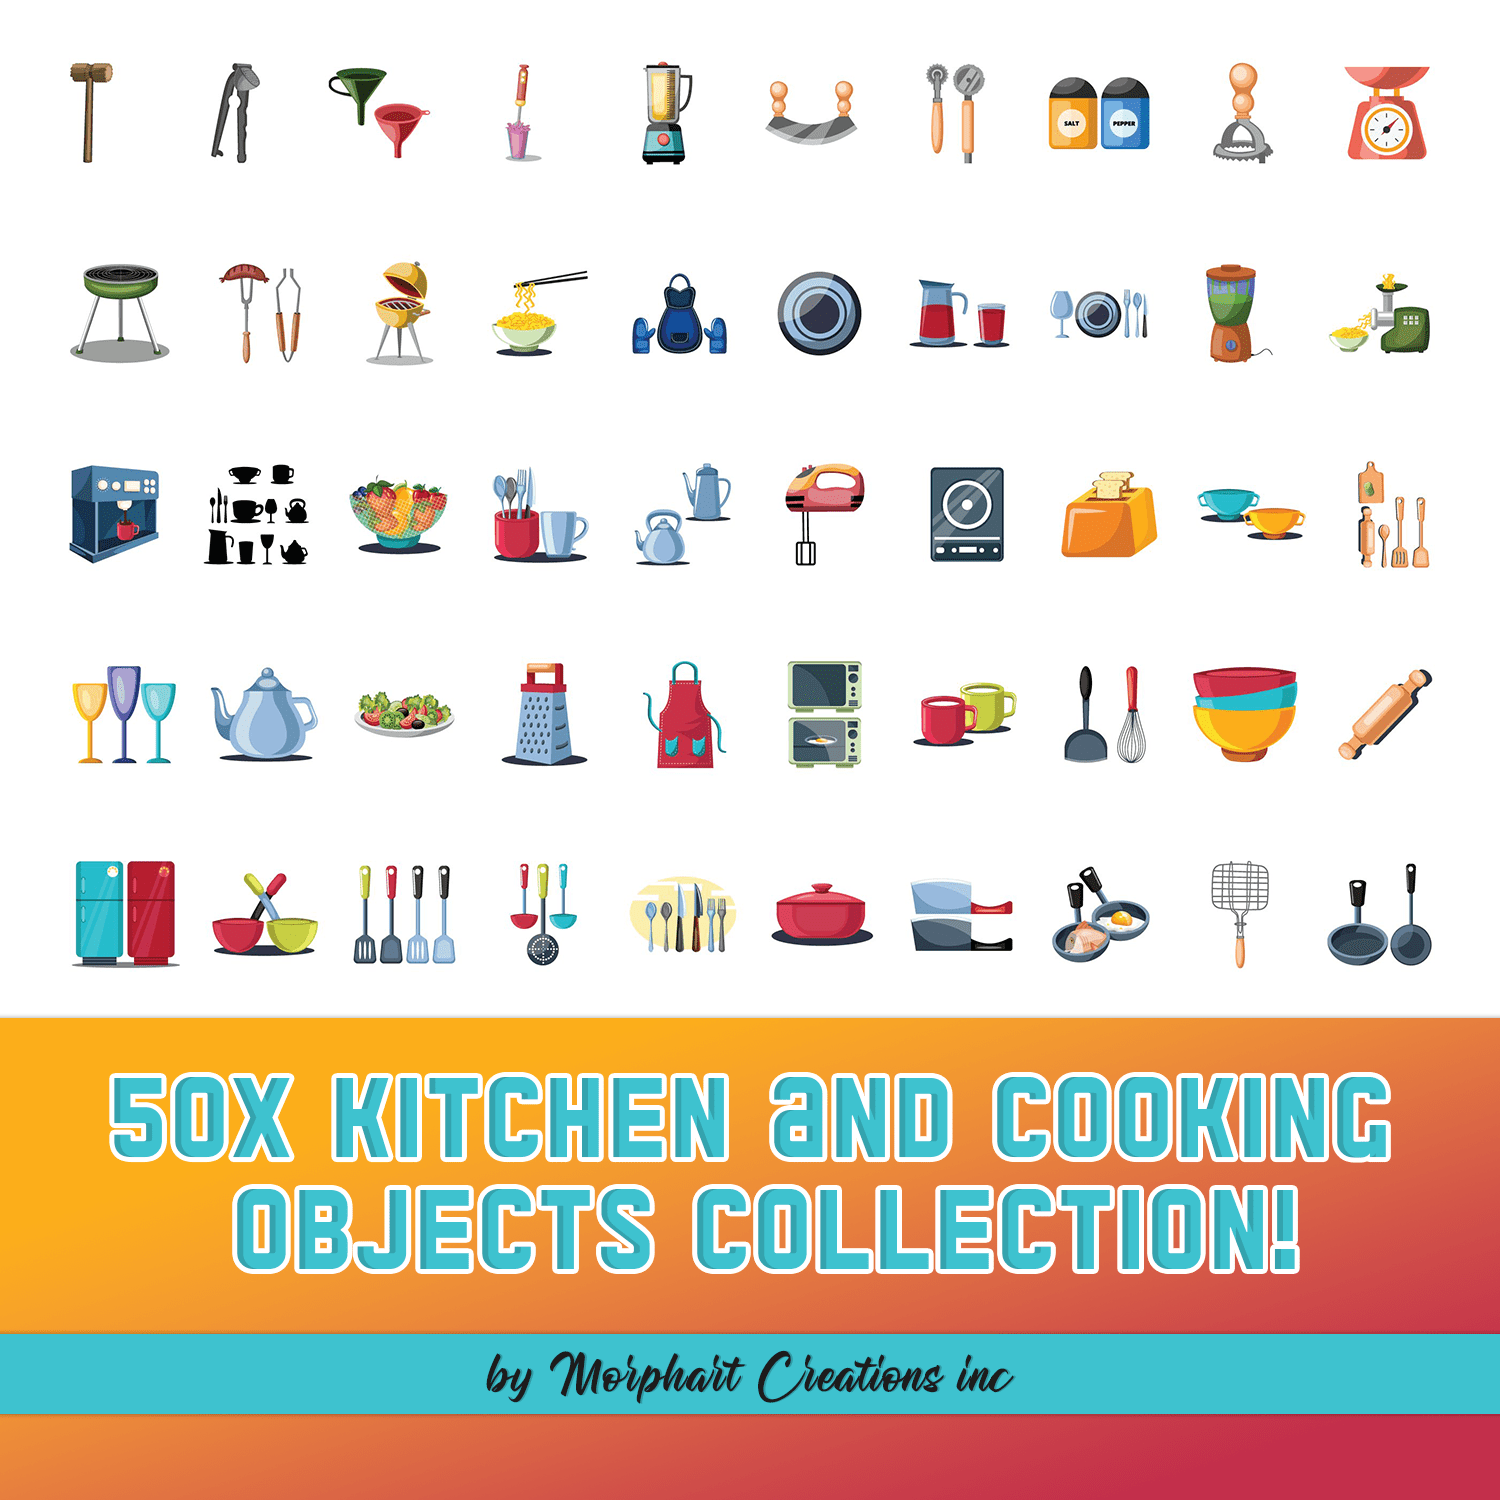 A collection of adorable images of kitchen and cooking items.